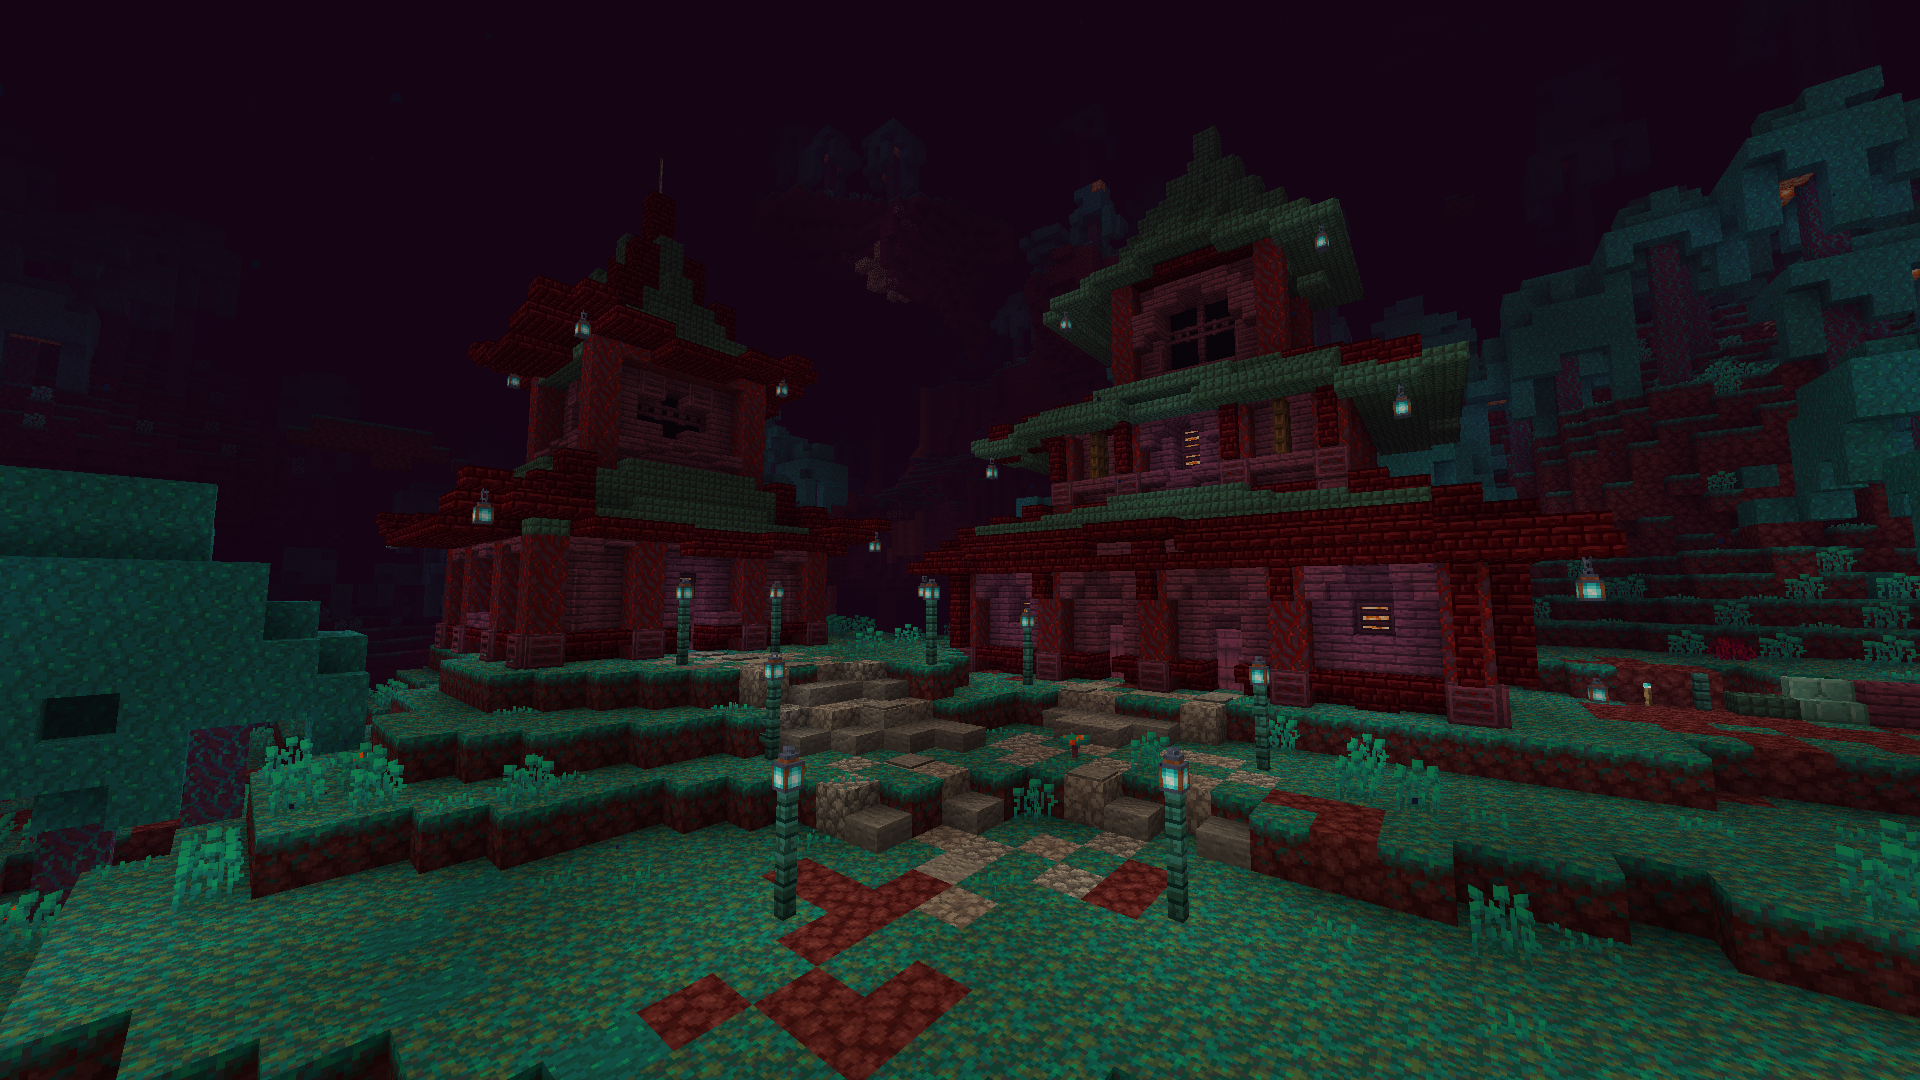 The new nether update biome works great with this theme im working with, Update soon when i finish it